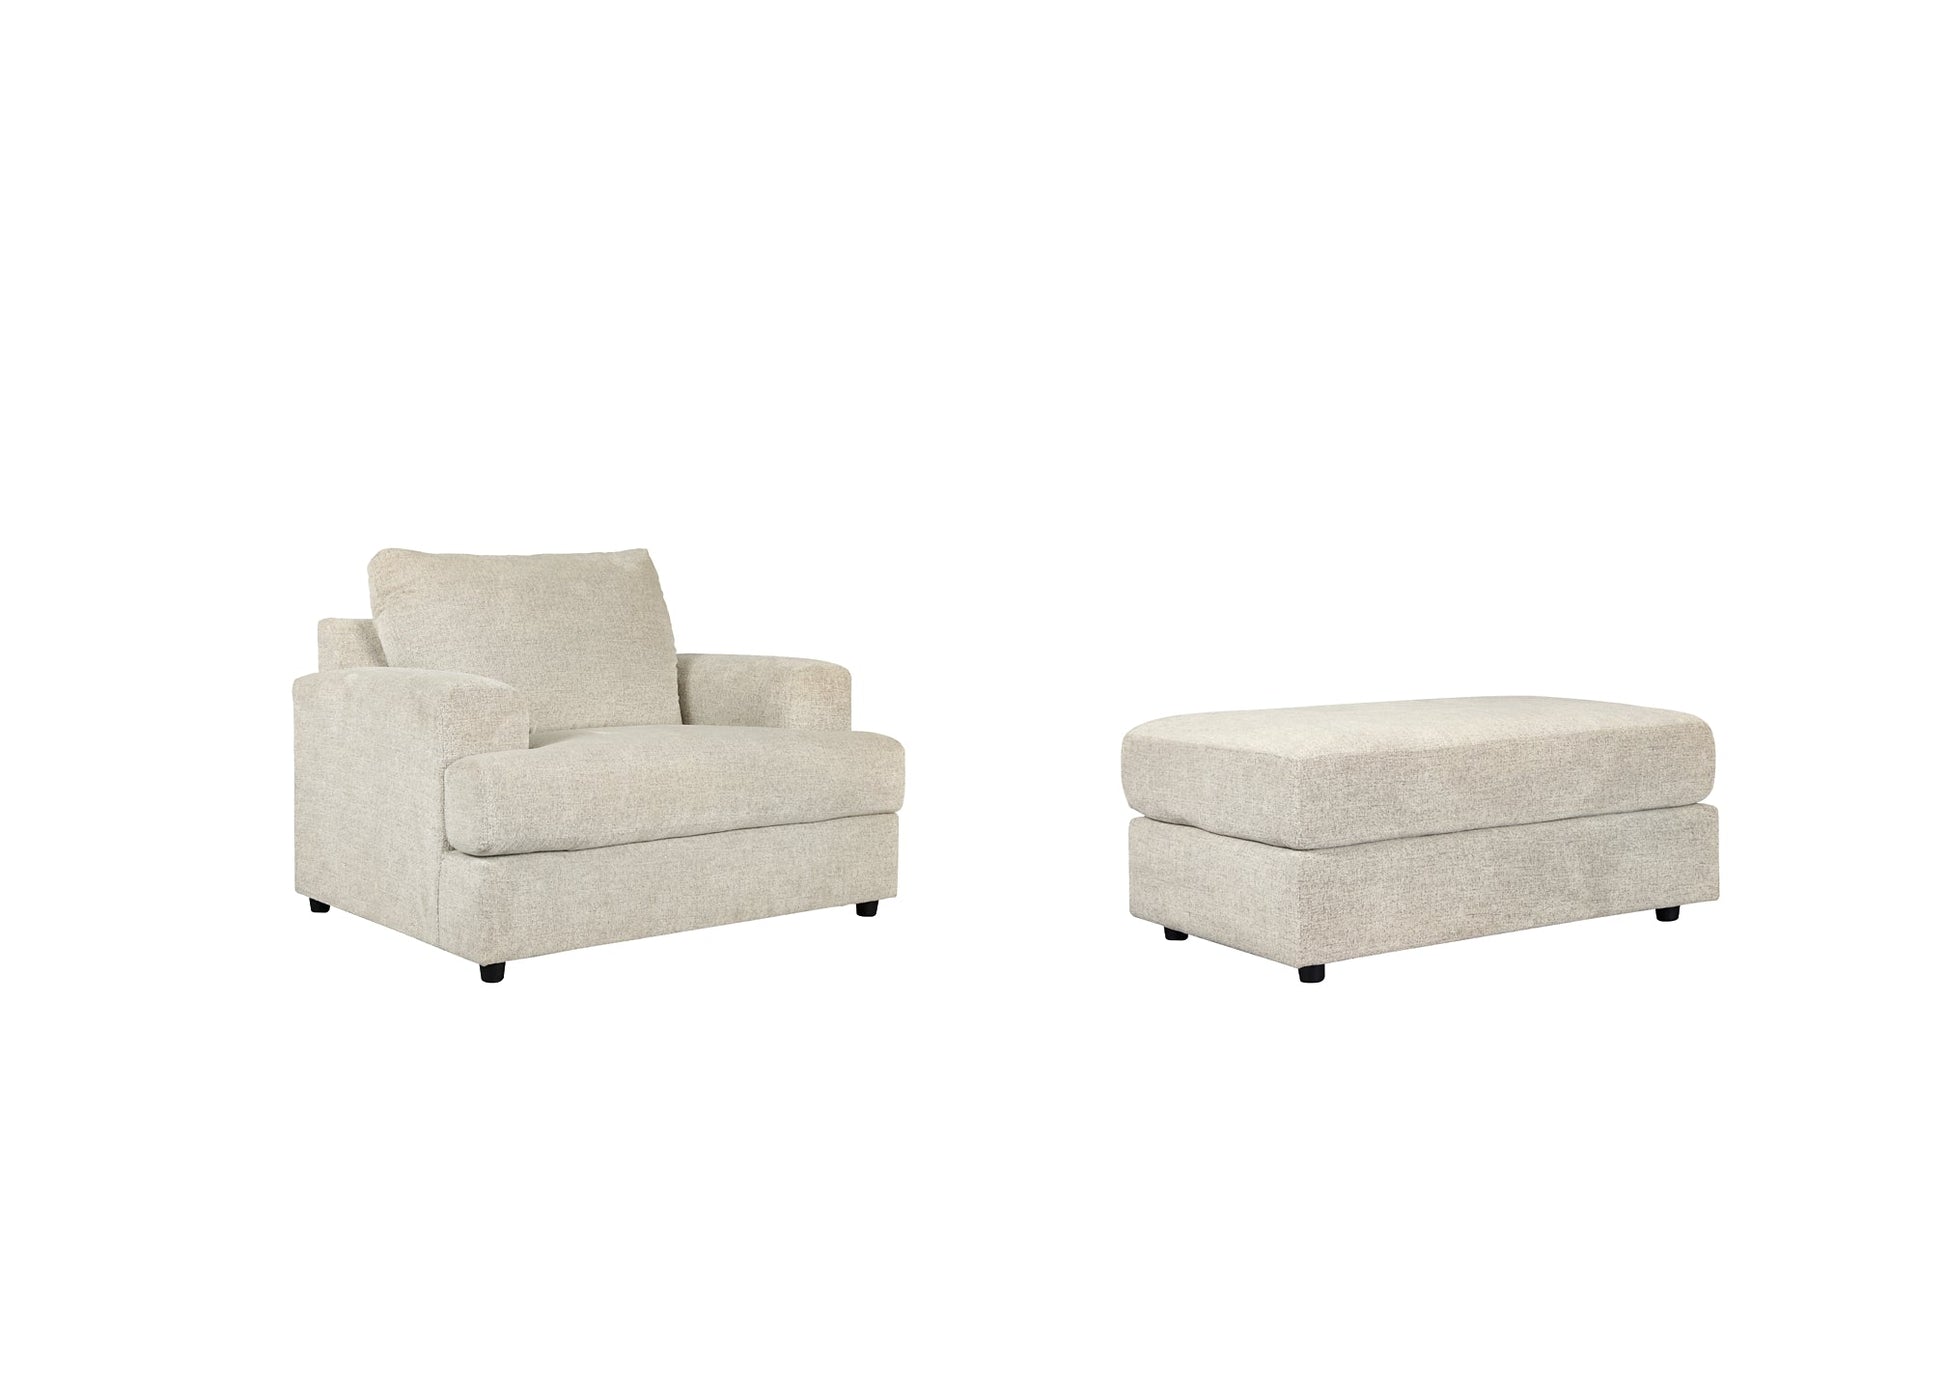 Soletren Chair and Ottoman at Cloud 9 Mattress & Furniture furniture, home furnishing, home decor